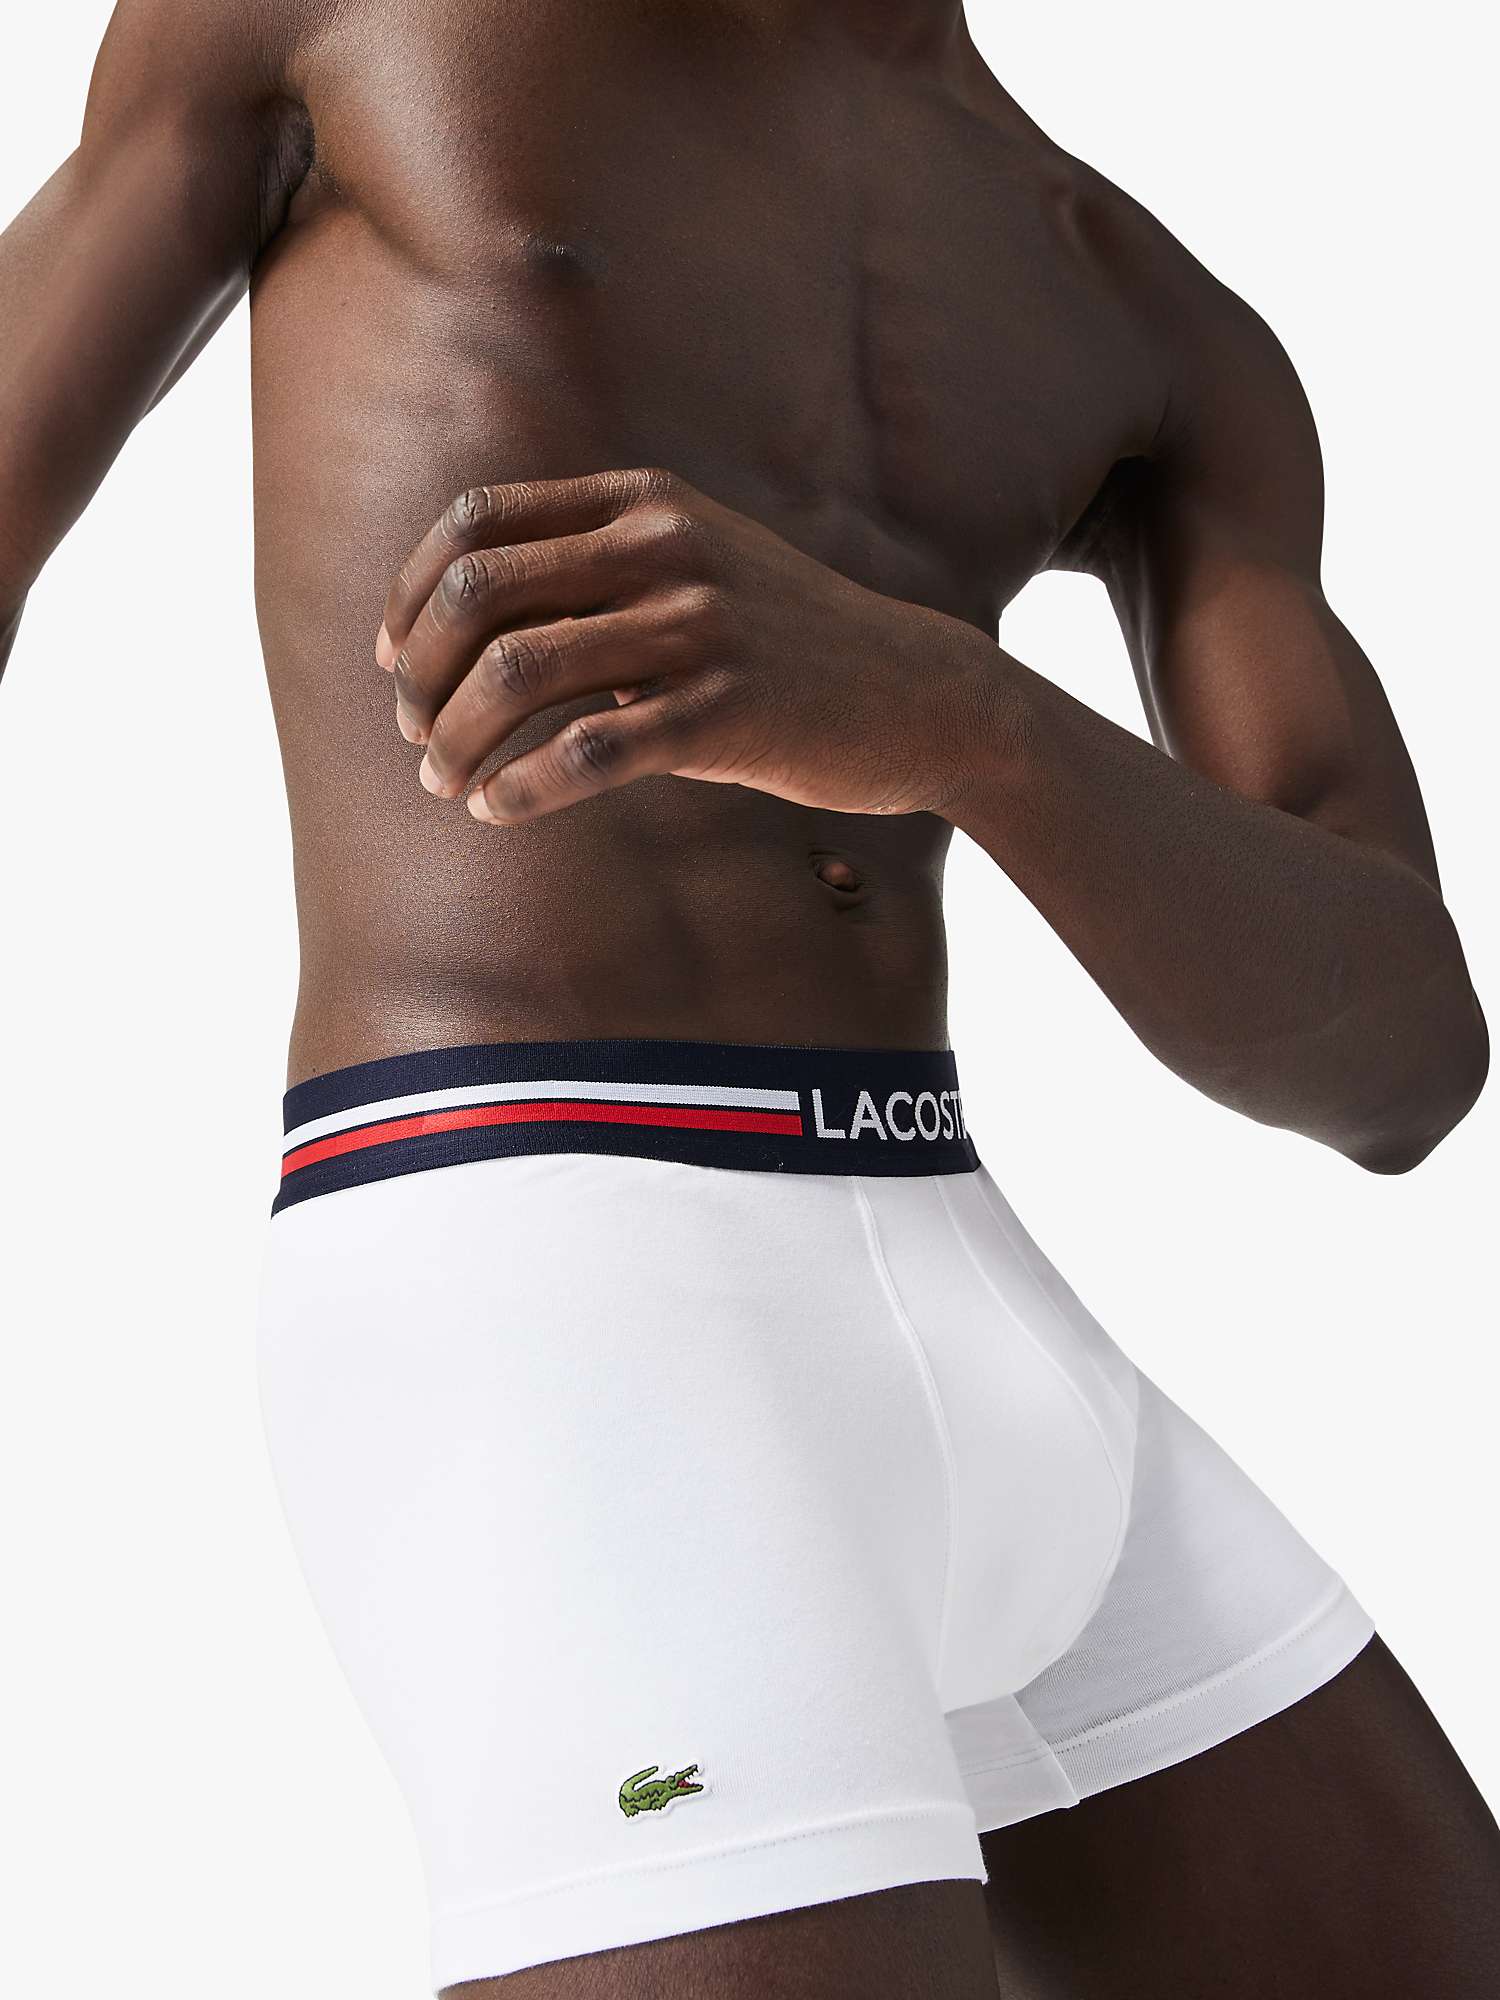 Buy Lacoste Three Tone Colour Waistband Trunks, Pack of 3, Marine/White Online at johnlewis.com